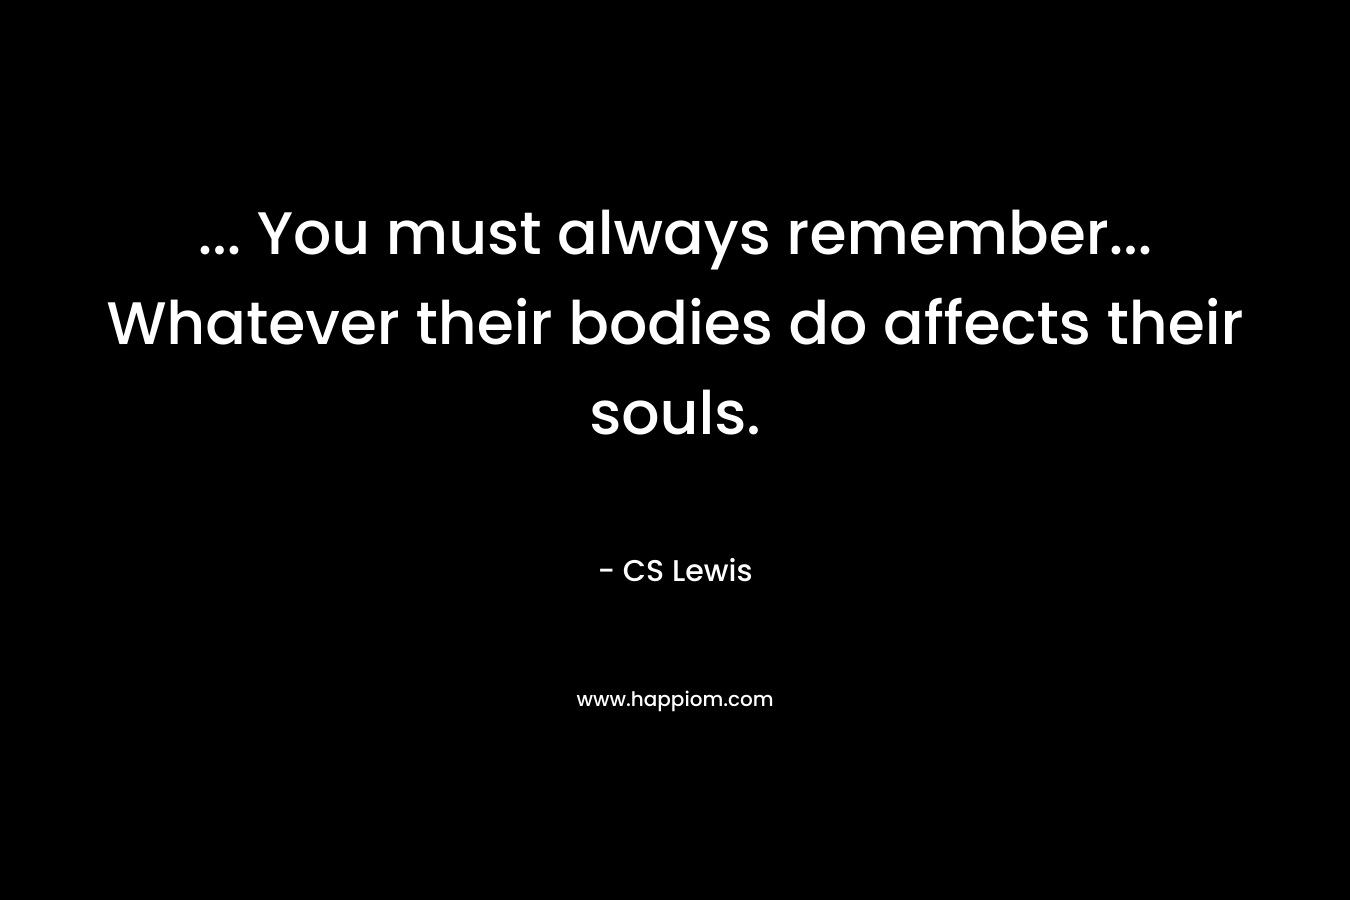 ... You must always remember... Whatever their bodies do affects their souls.